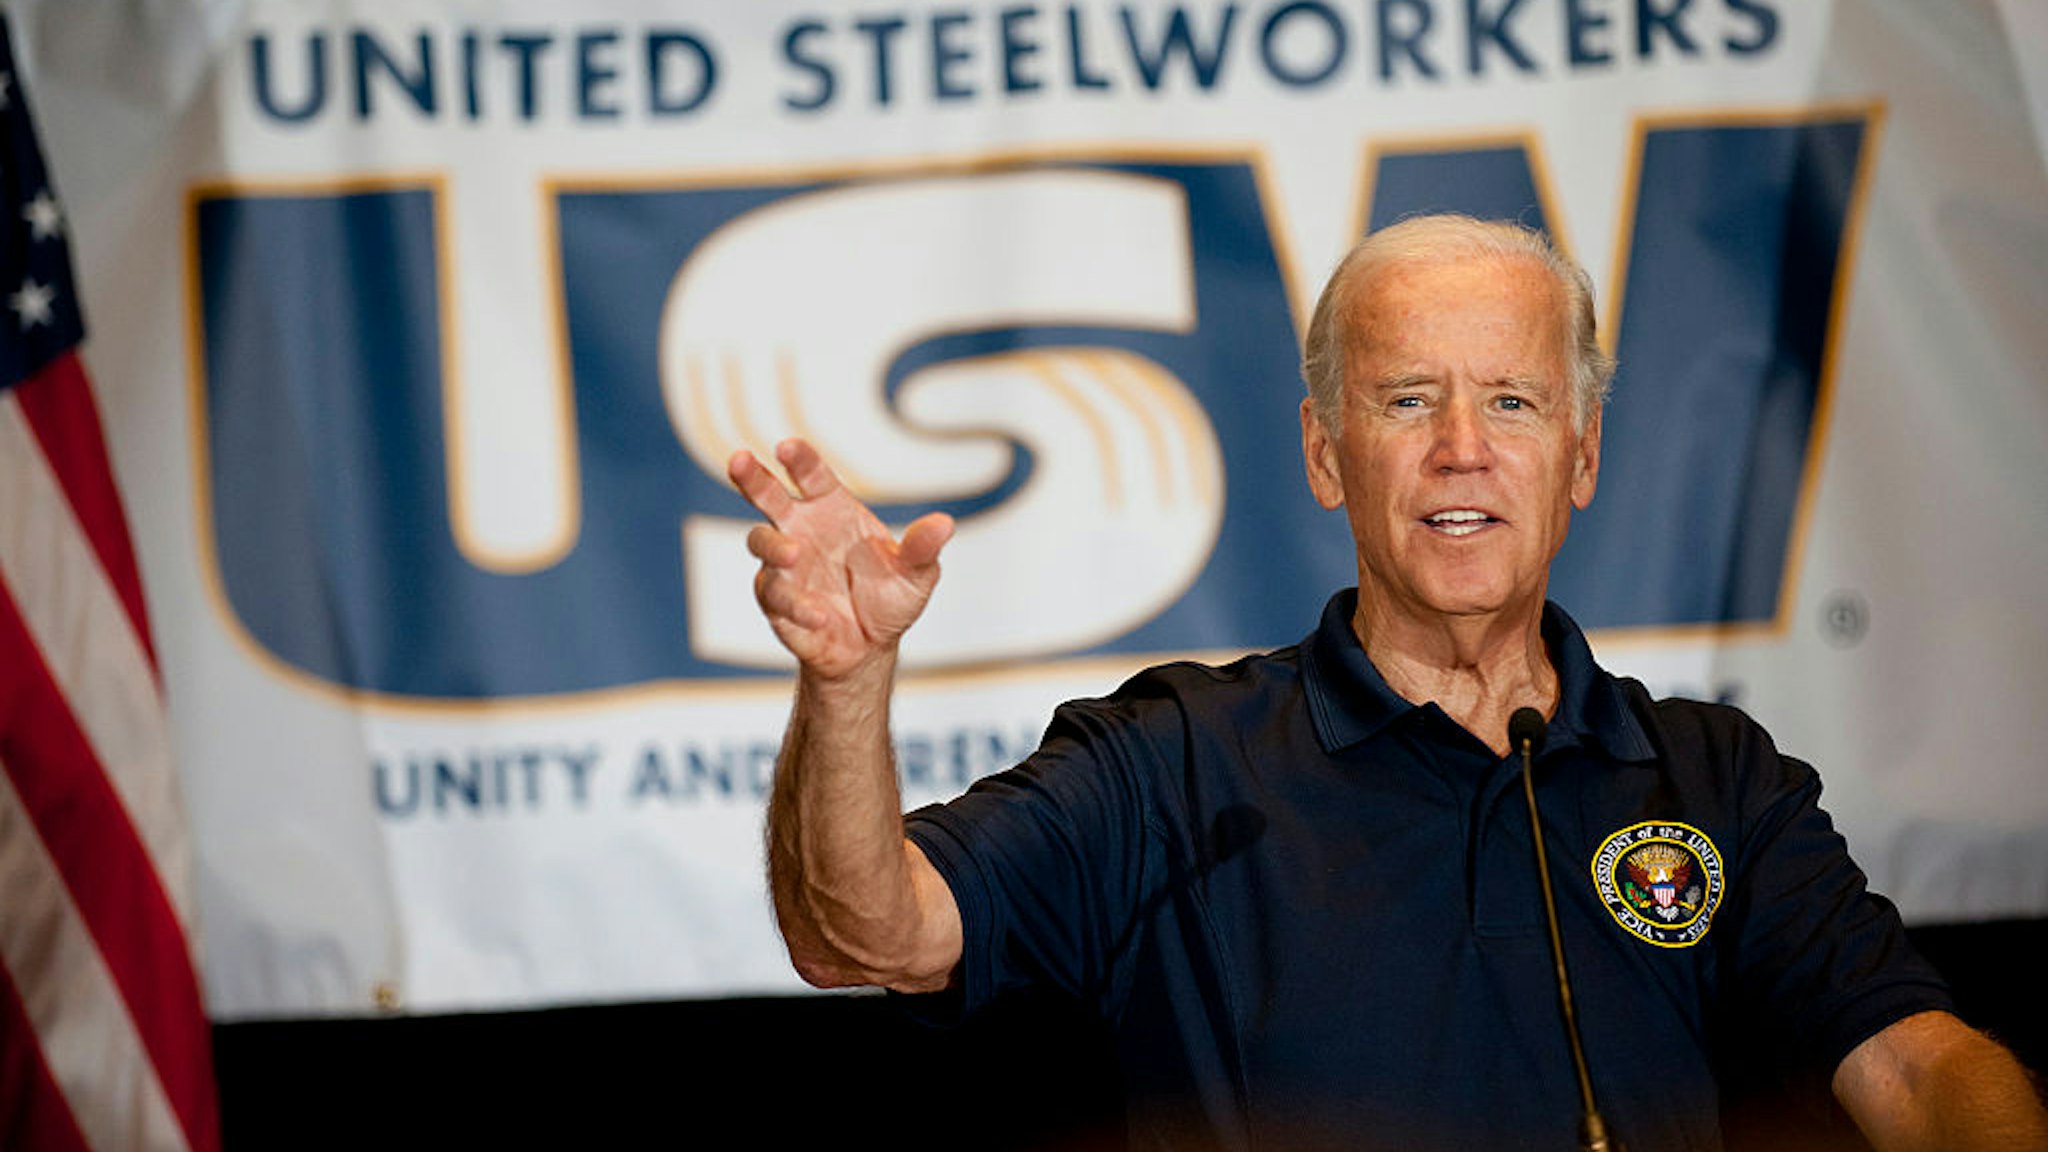 PITTSBURGH, PA - SEPTEMBER 7: U.S. Vice President Joe Biden speaks to union members and supporters at the United Steelworkers Headquarters following the annual Allegheny County Labor Day Parade September 7, 2015 in Pittsburgh, Pennsylvania. Biden has been subject of speculation about whether he will run for the U.S. presidency. (Photo by Jeff Swensen/Getty Images)